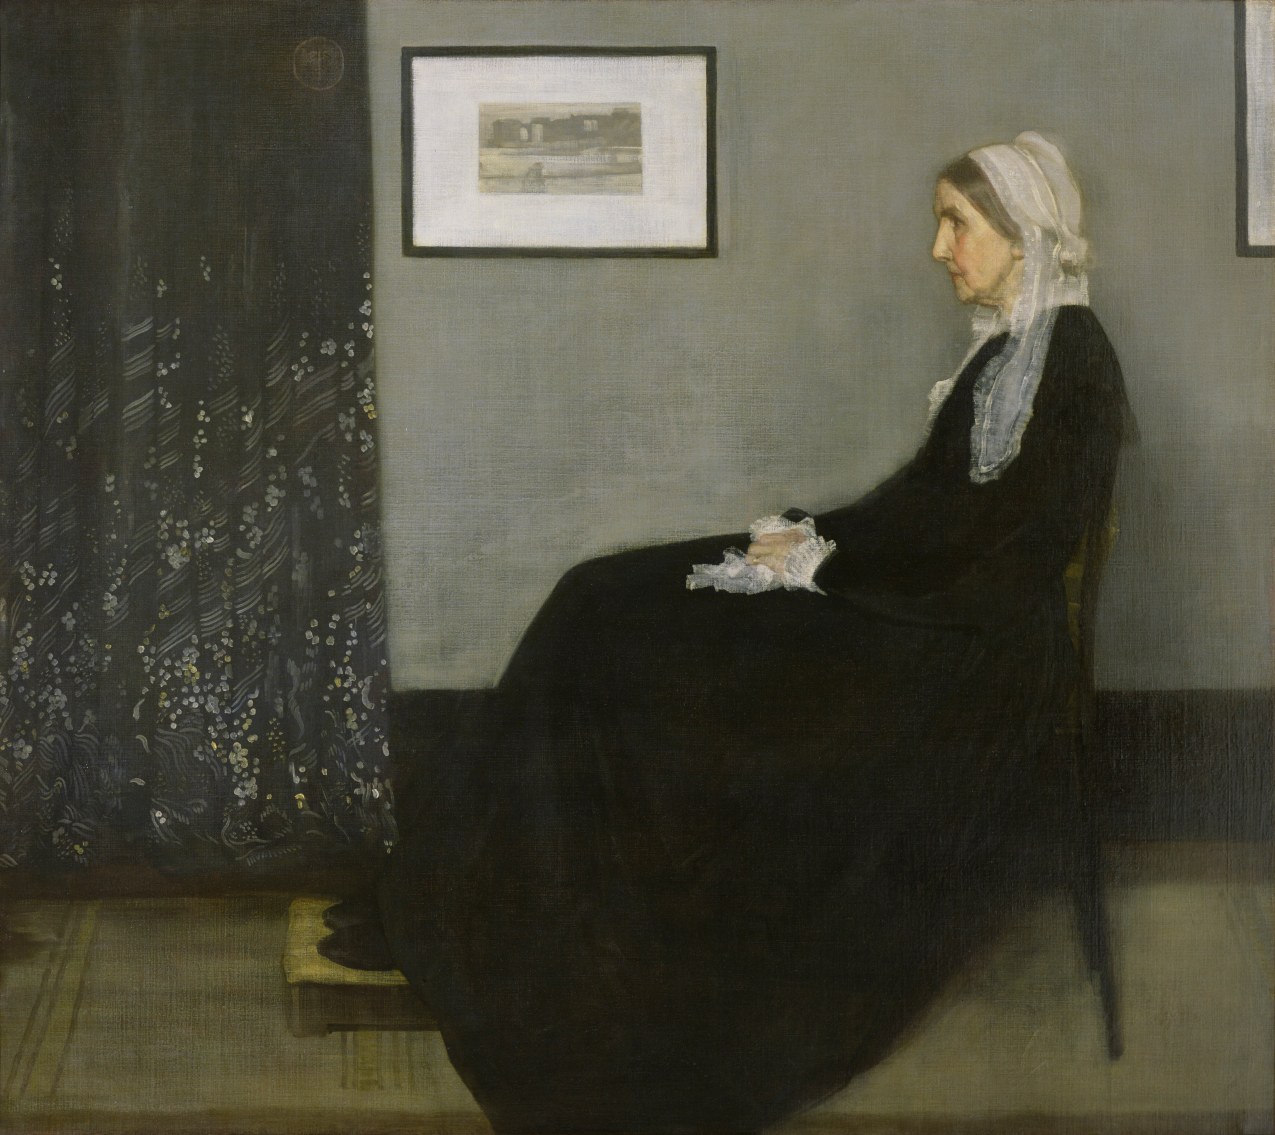 The painting, "Arrangement in Grey and Black No. 1" or "Whistler's Mother", which depicts a middle-aged woman wearing a black dress and a white head covering, sitting in a chair.